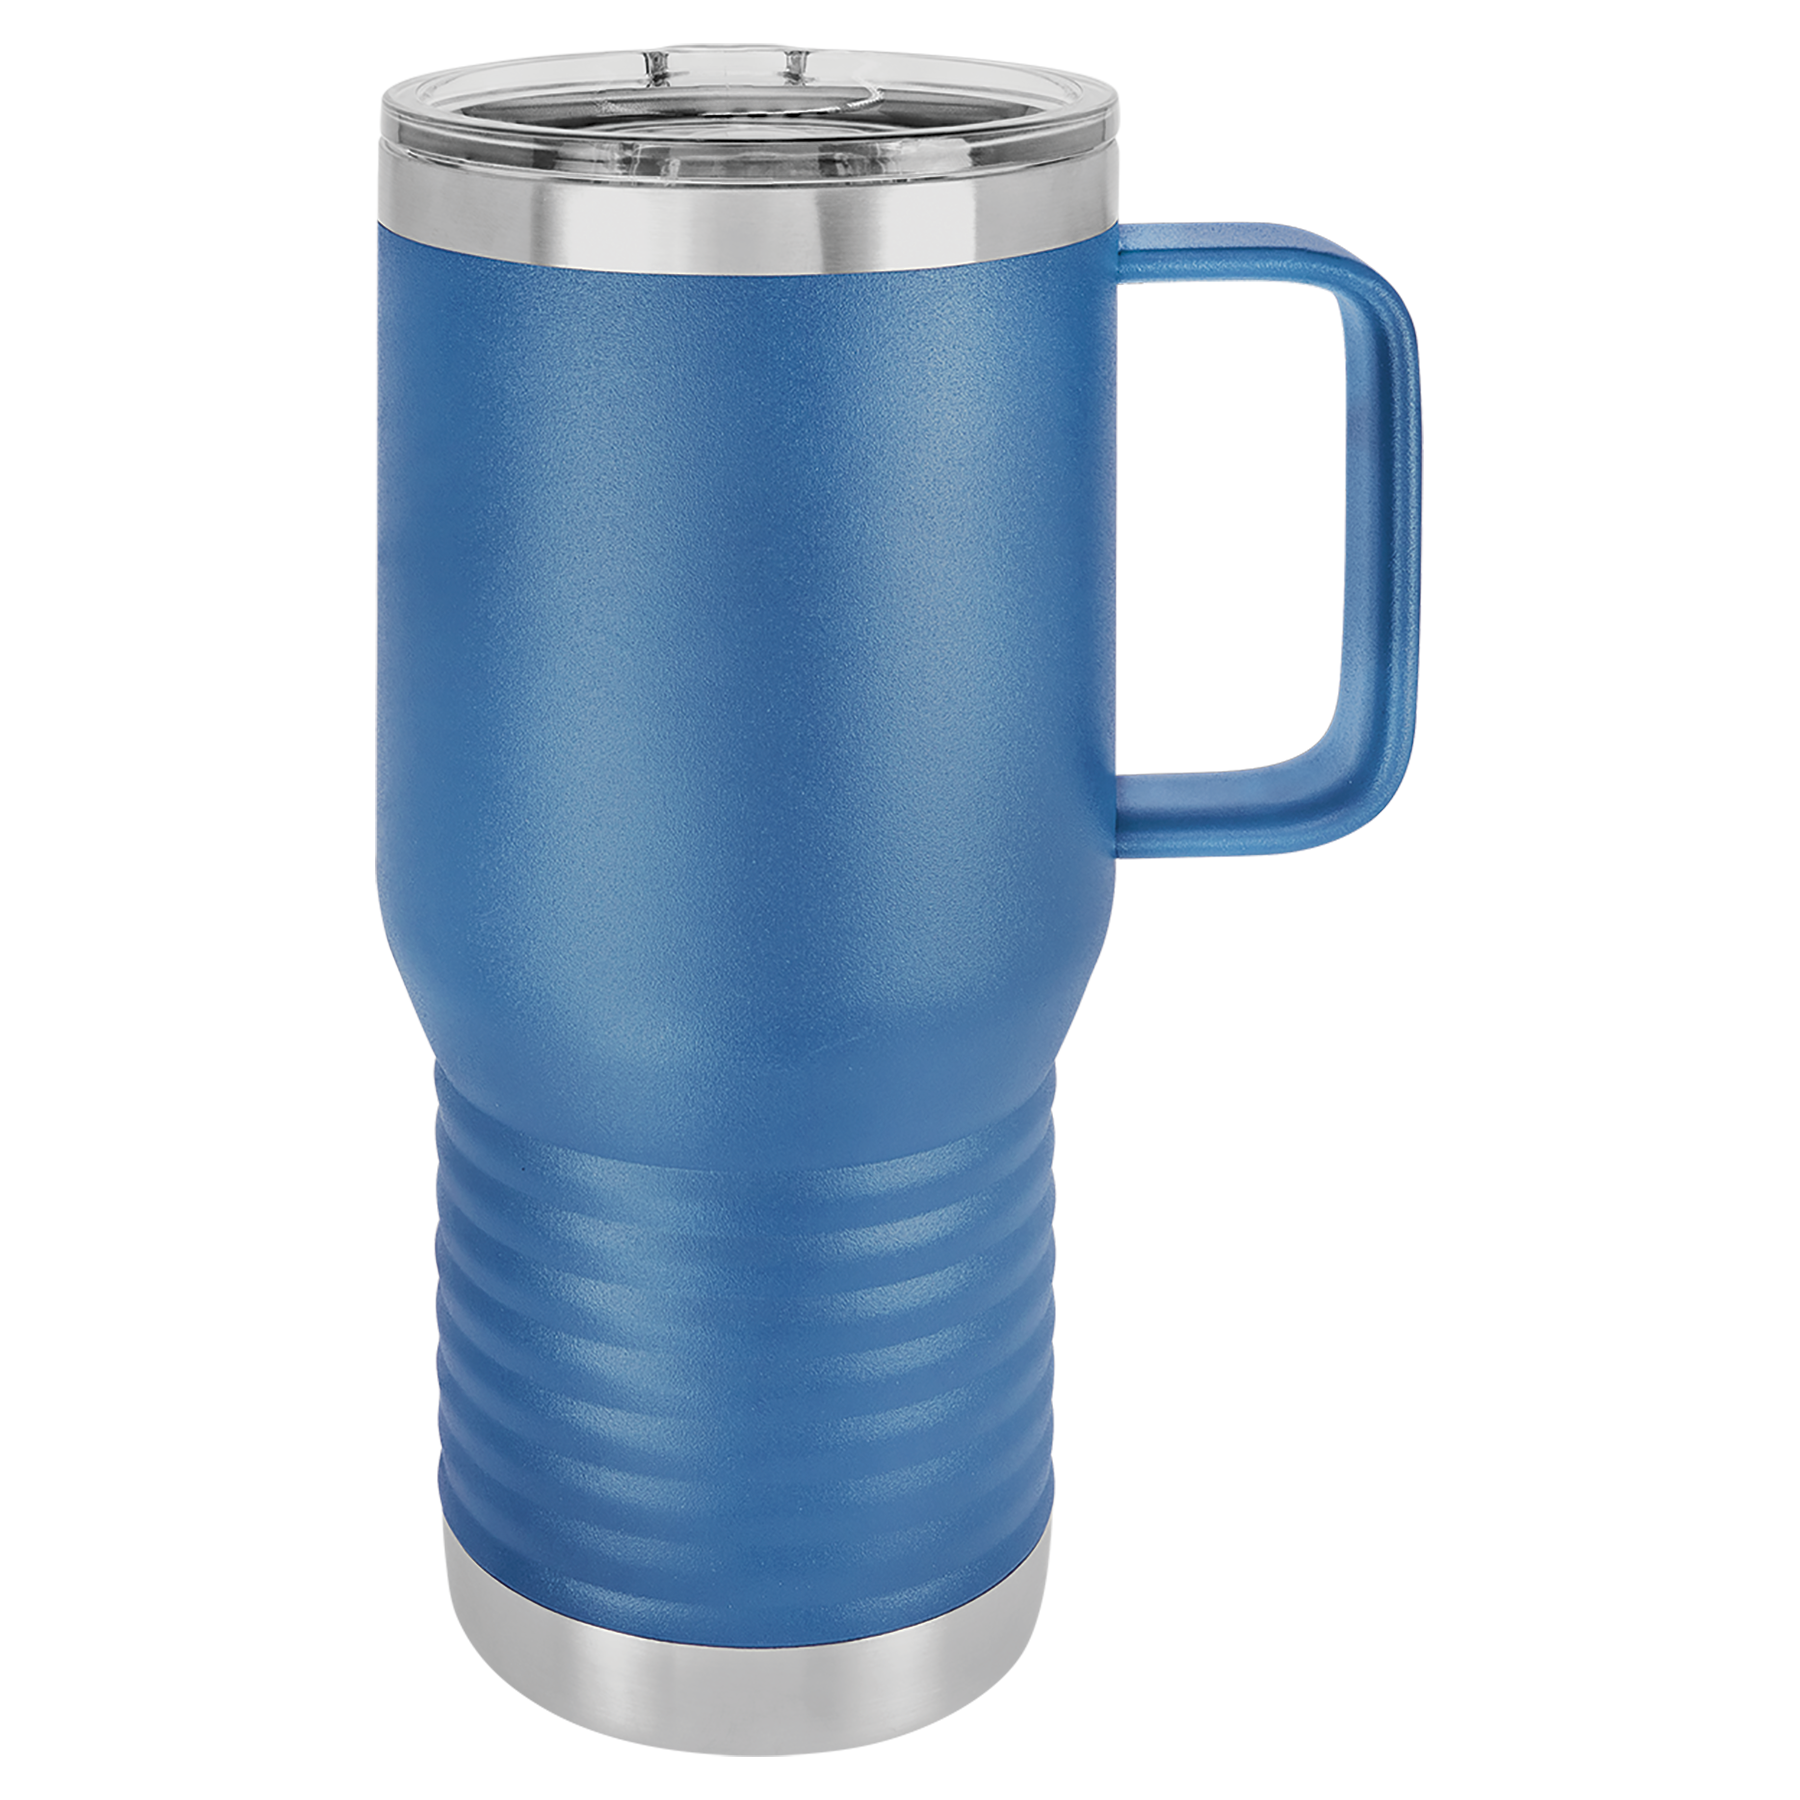 RecPro 20oz Handle for Stainless Steel Tumbler Blue